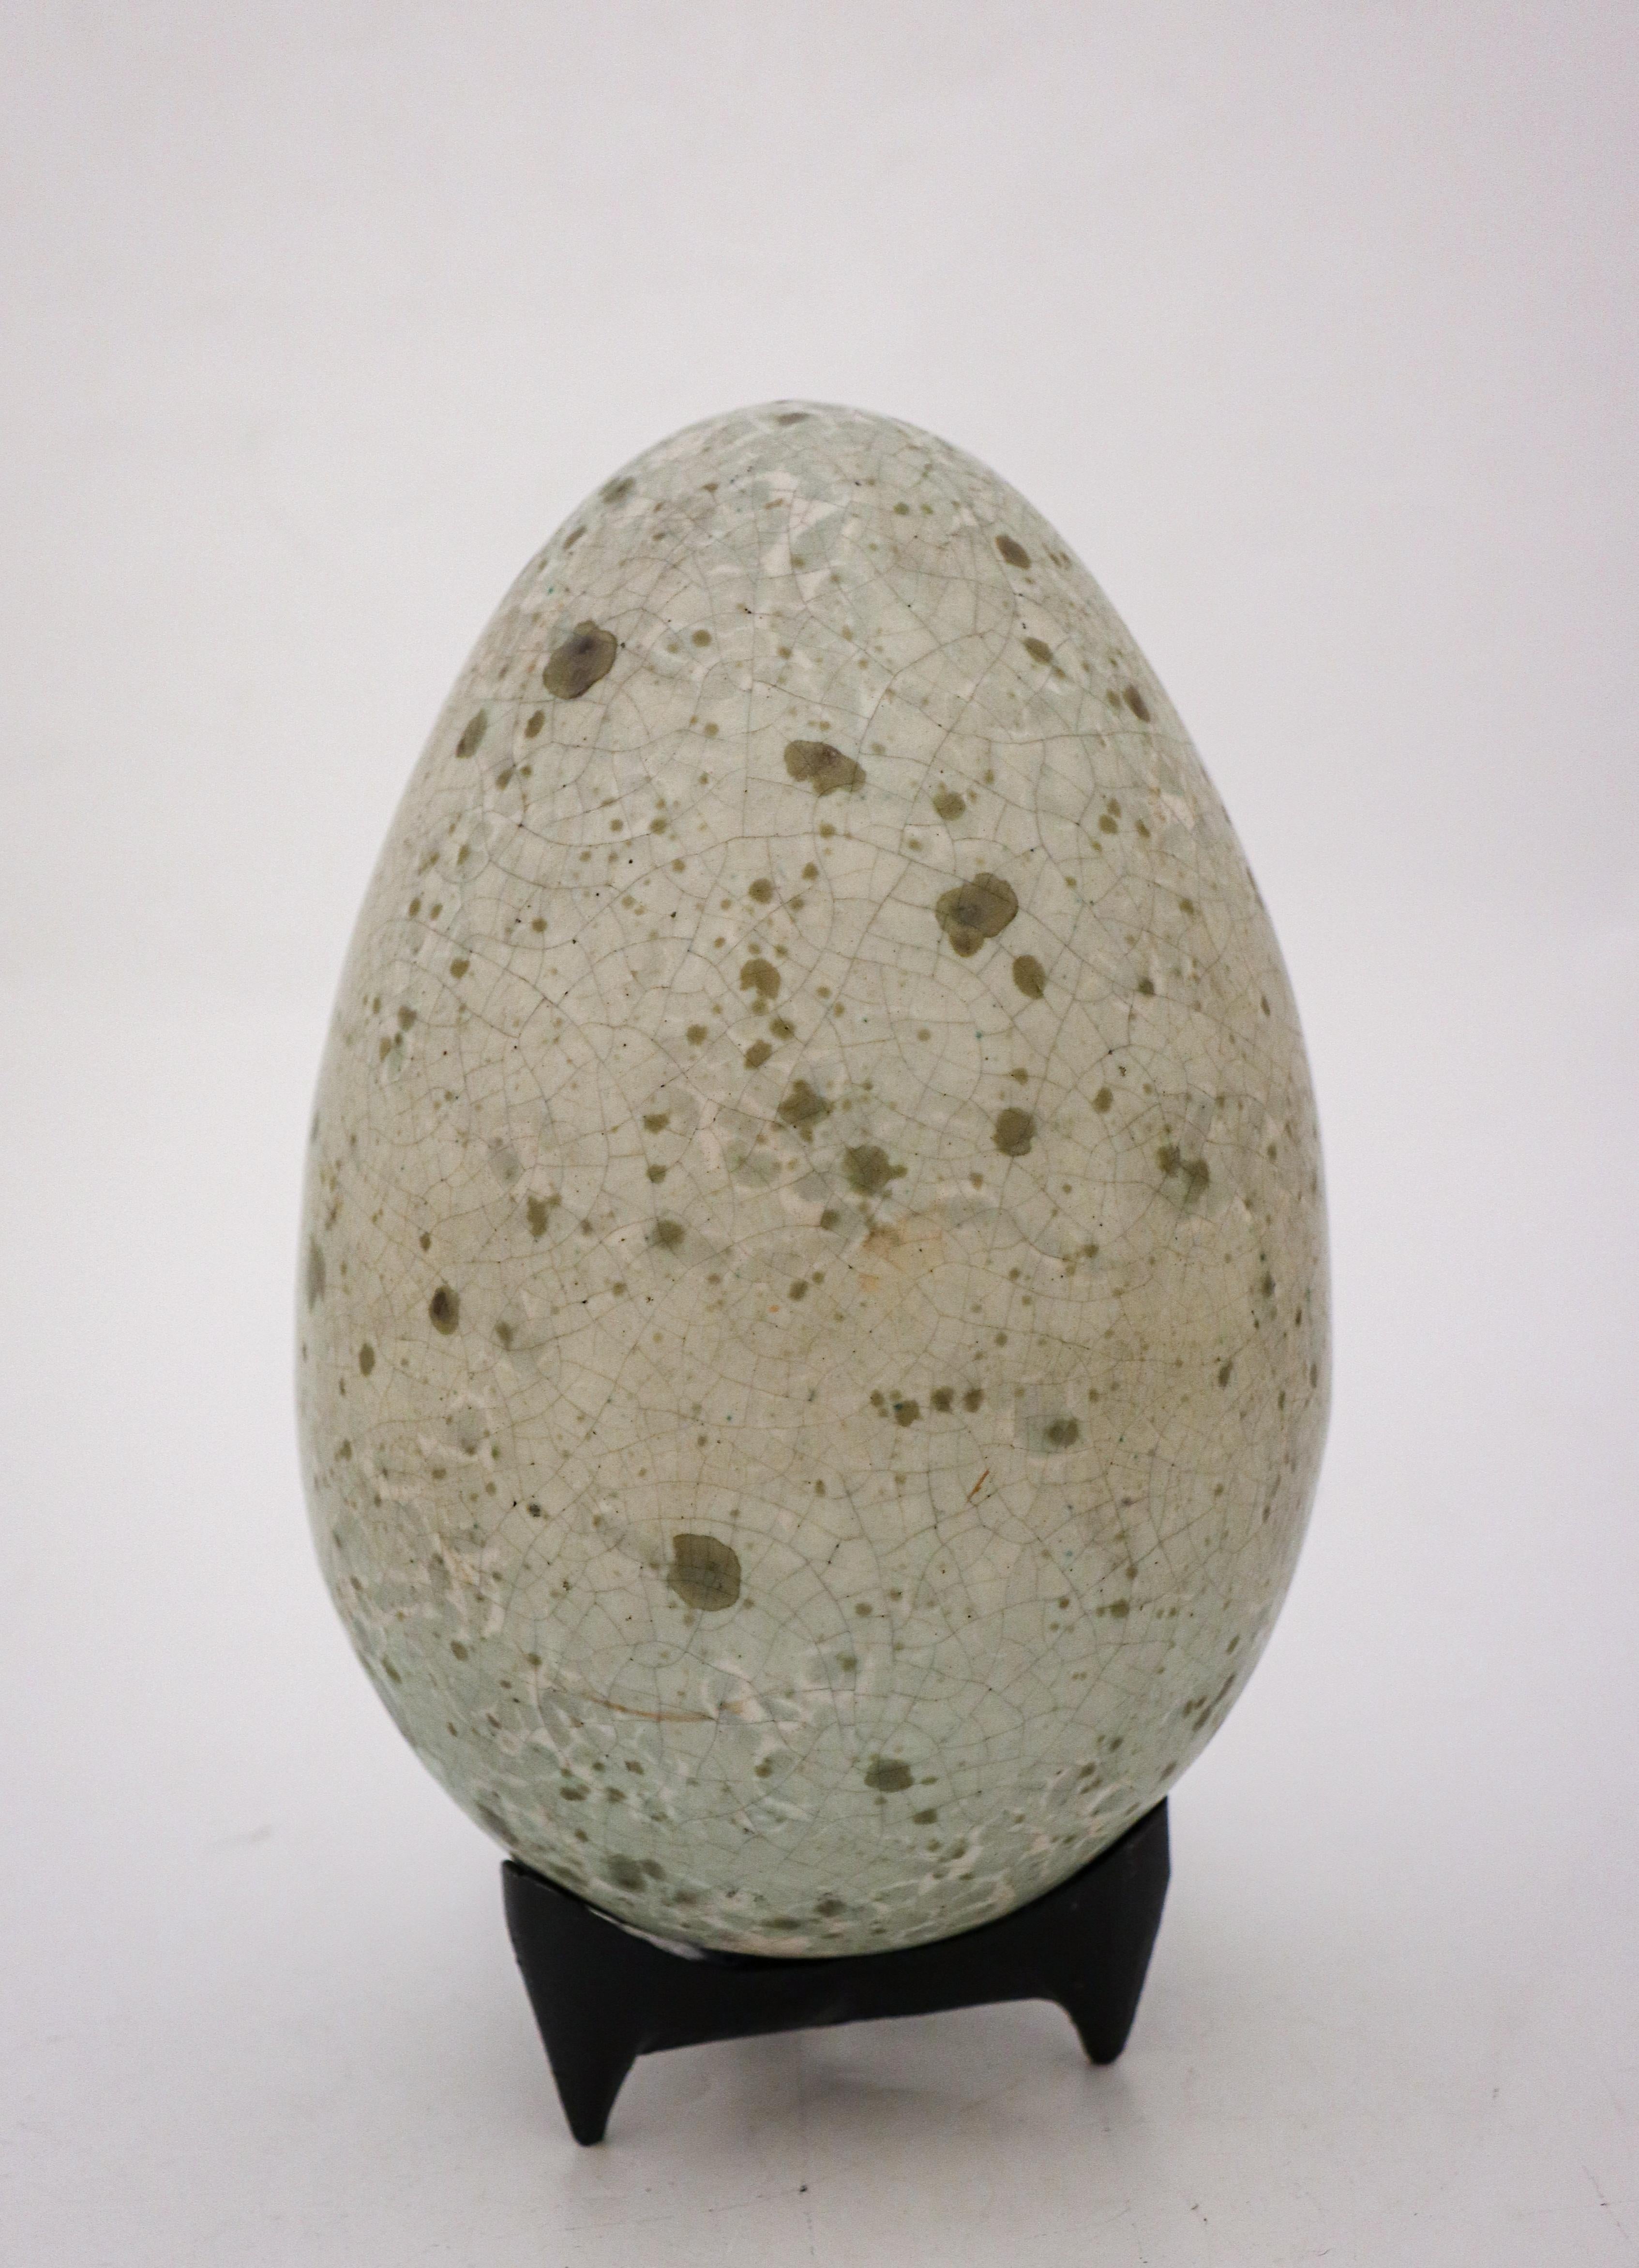 Egg designed by the Swedish ceramicist Hans Hedberg, who lived and worked in Biot, France. This egg is 25 cm (10